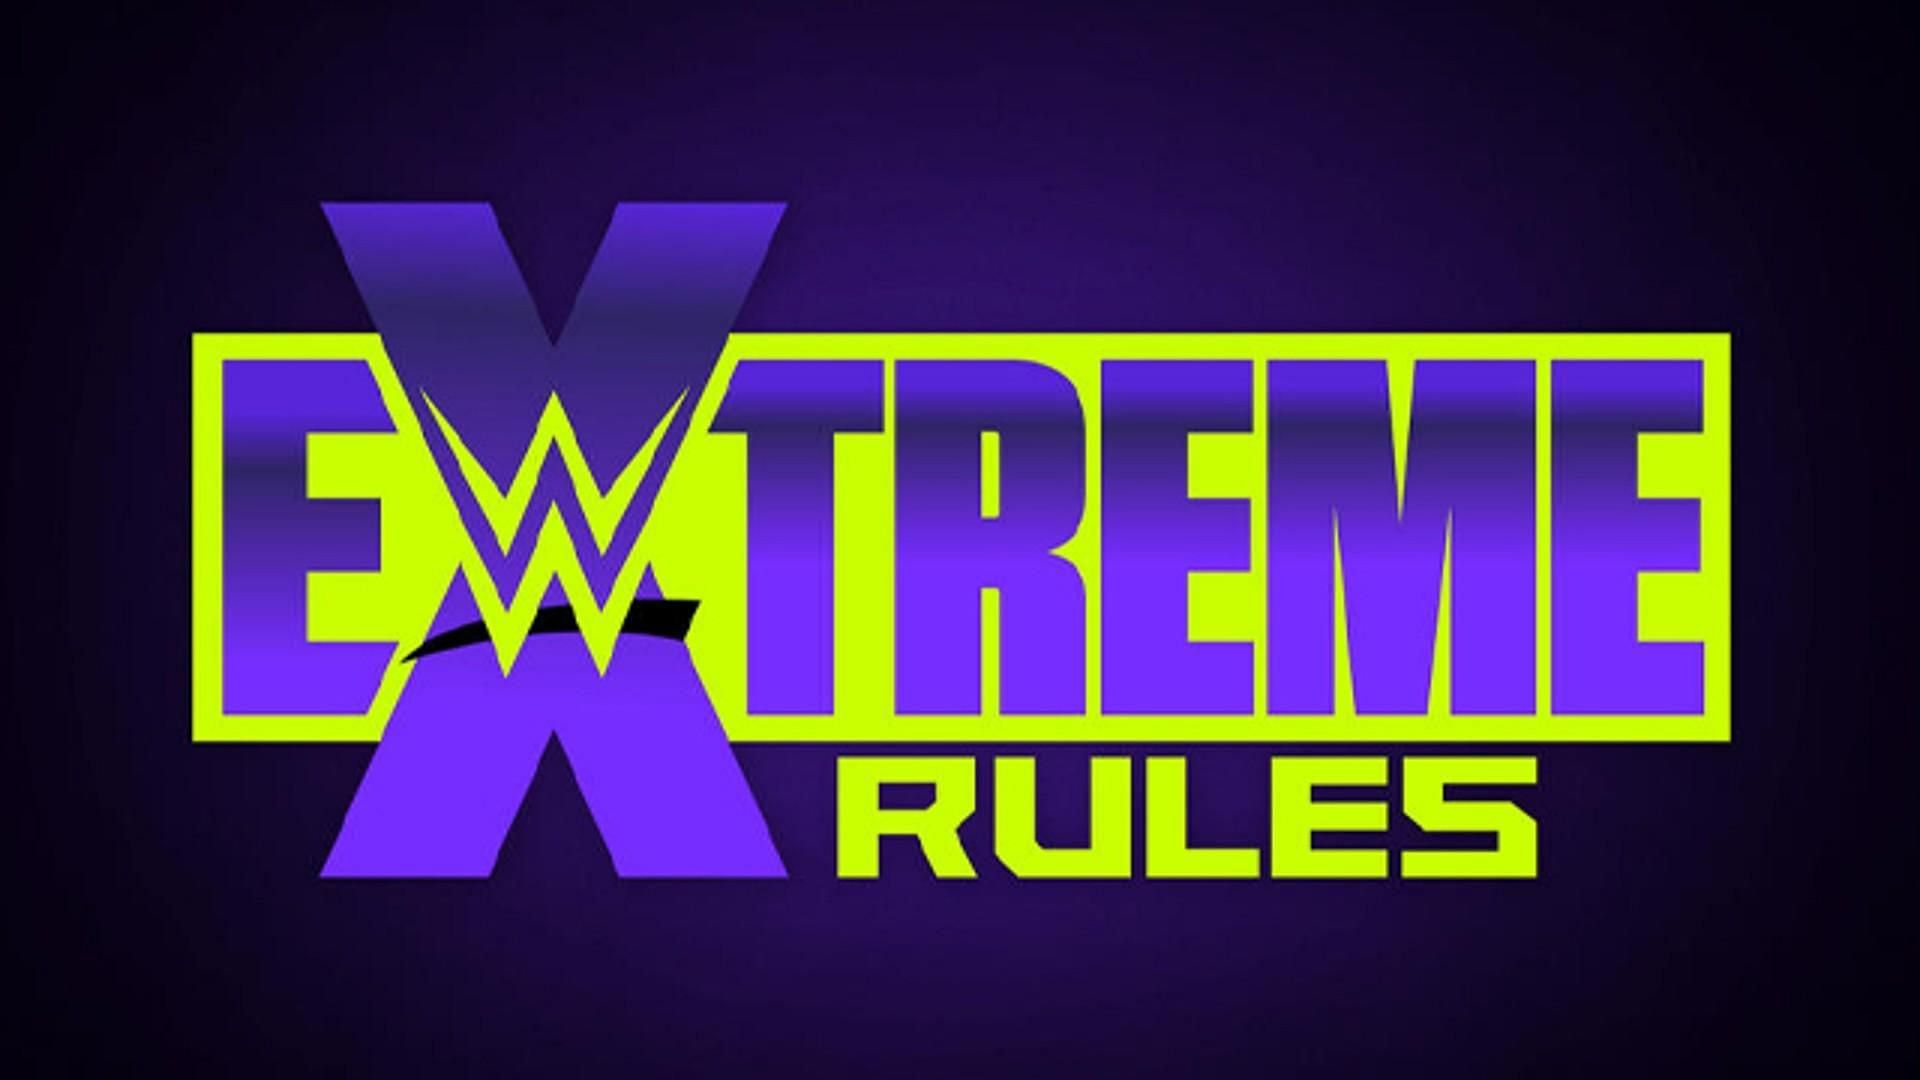 WWE Extreme Rules 2022 Takes Place Saturday, October 28th from Philadelphia, PA